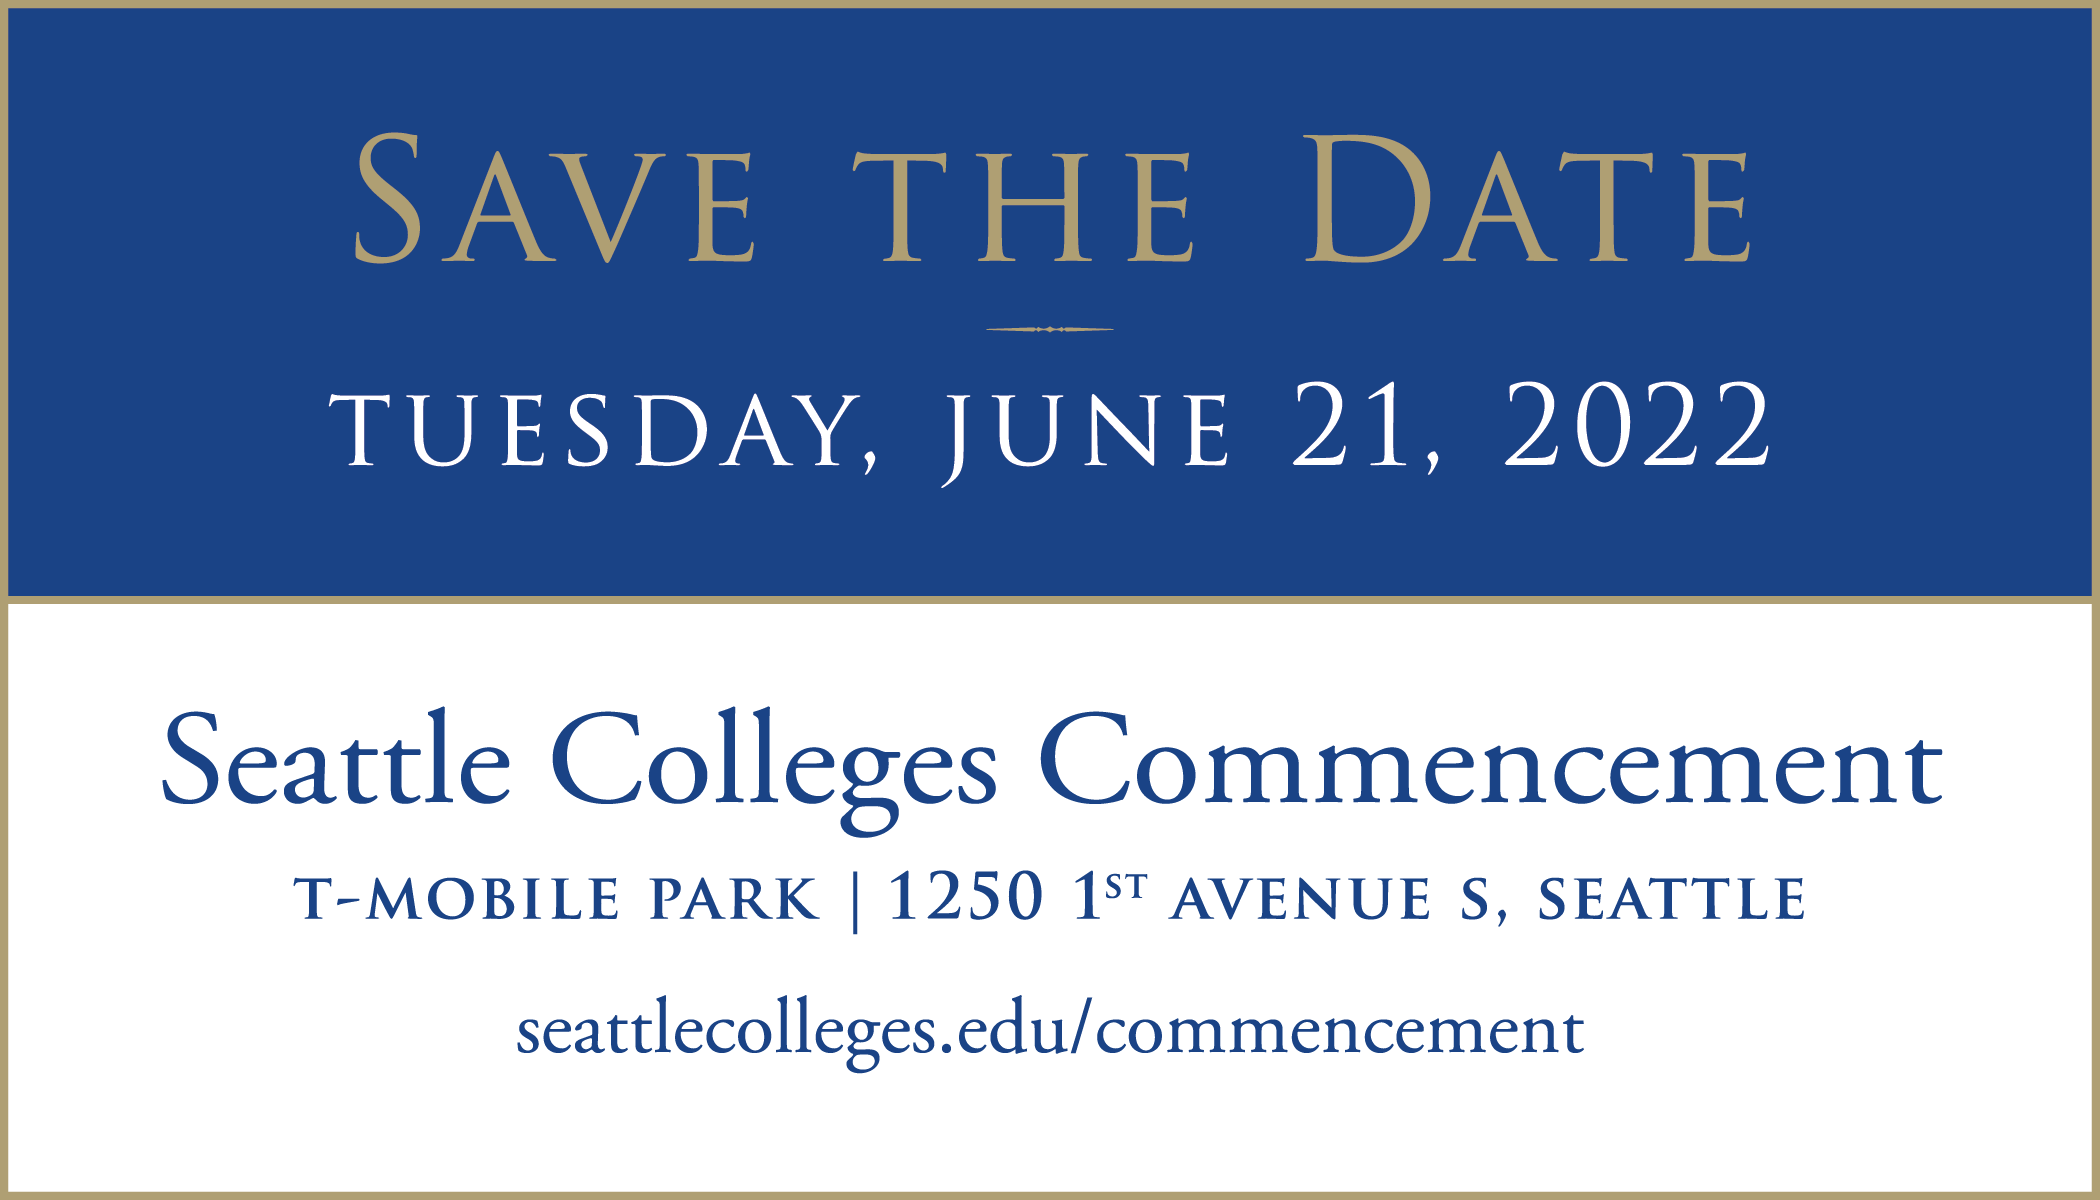 Save the Date - Seattle Colleges Commencement